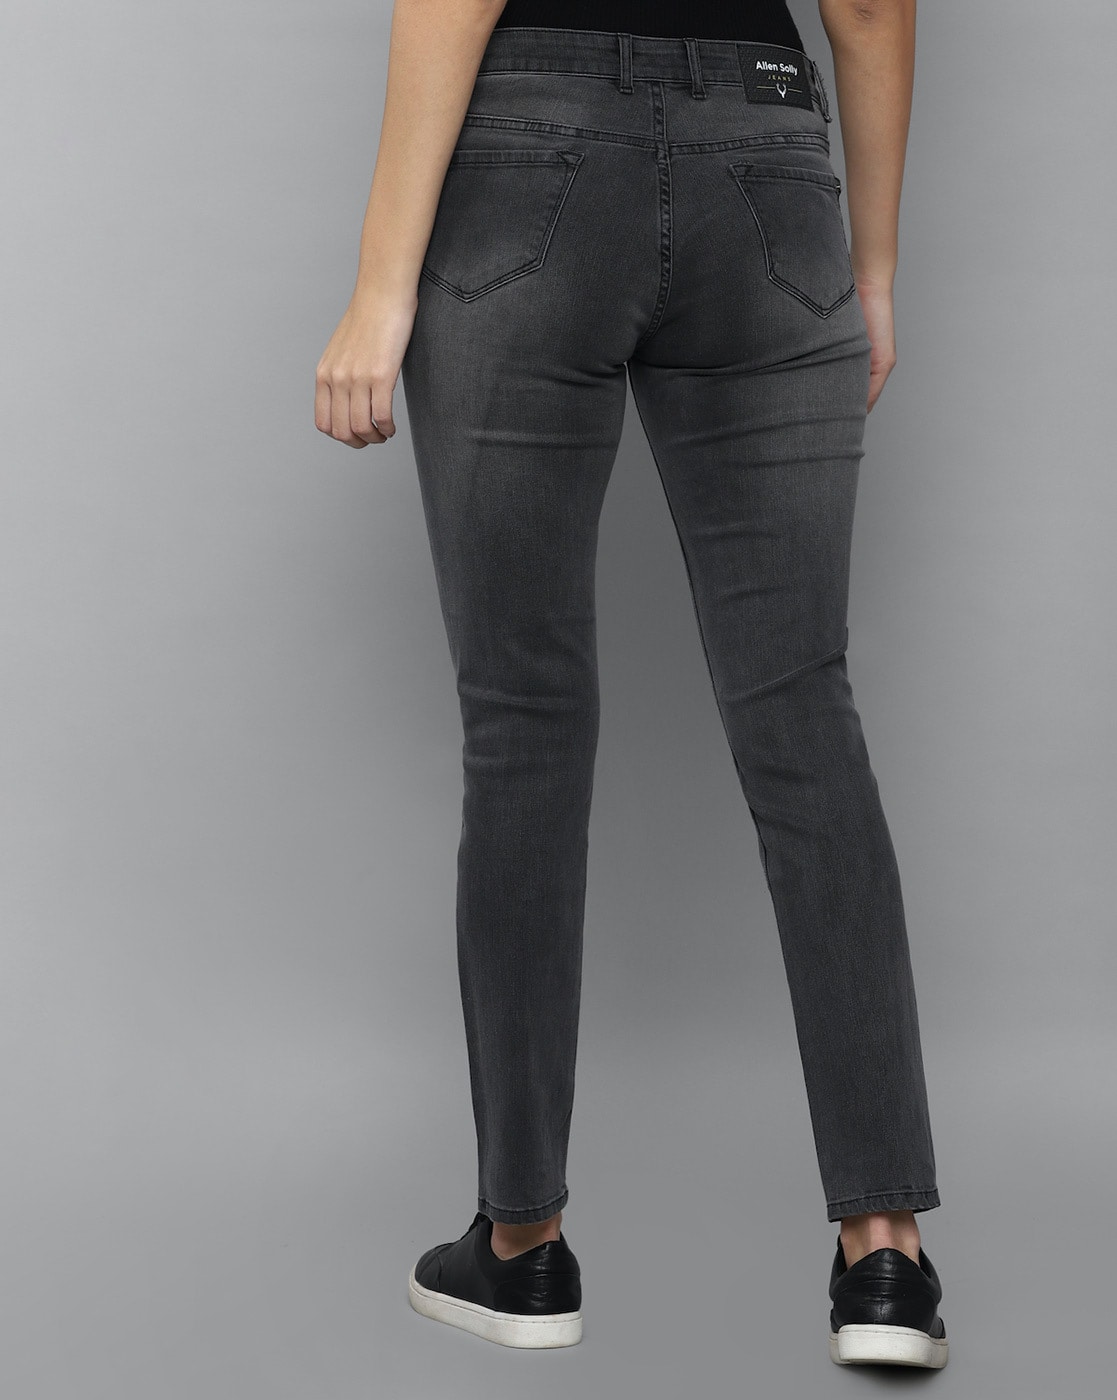 Allen Solly Woman Women Navy Blue Heavy Fade Jeans Price in India, Full  Specifications & Offers | DTashion.com